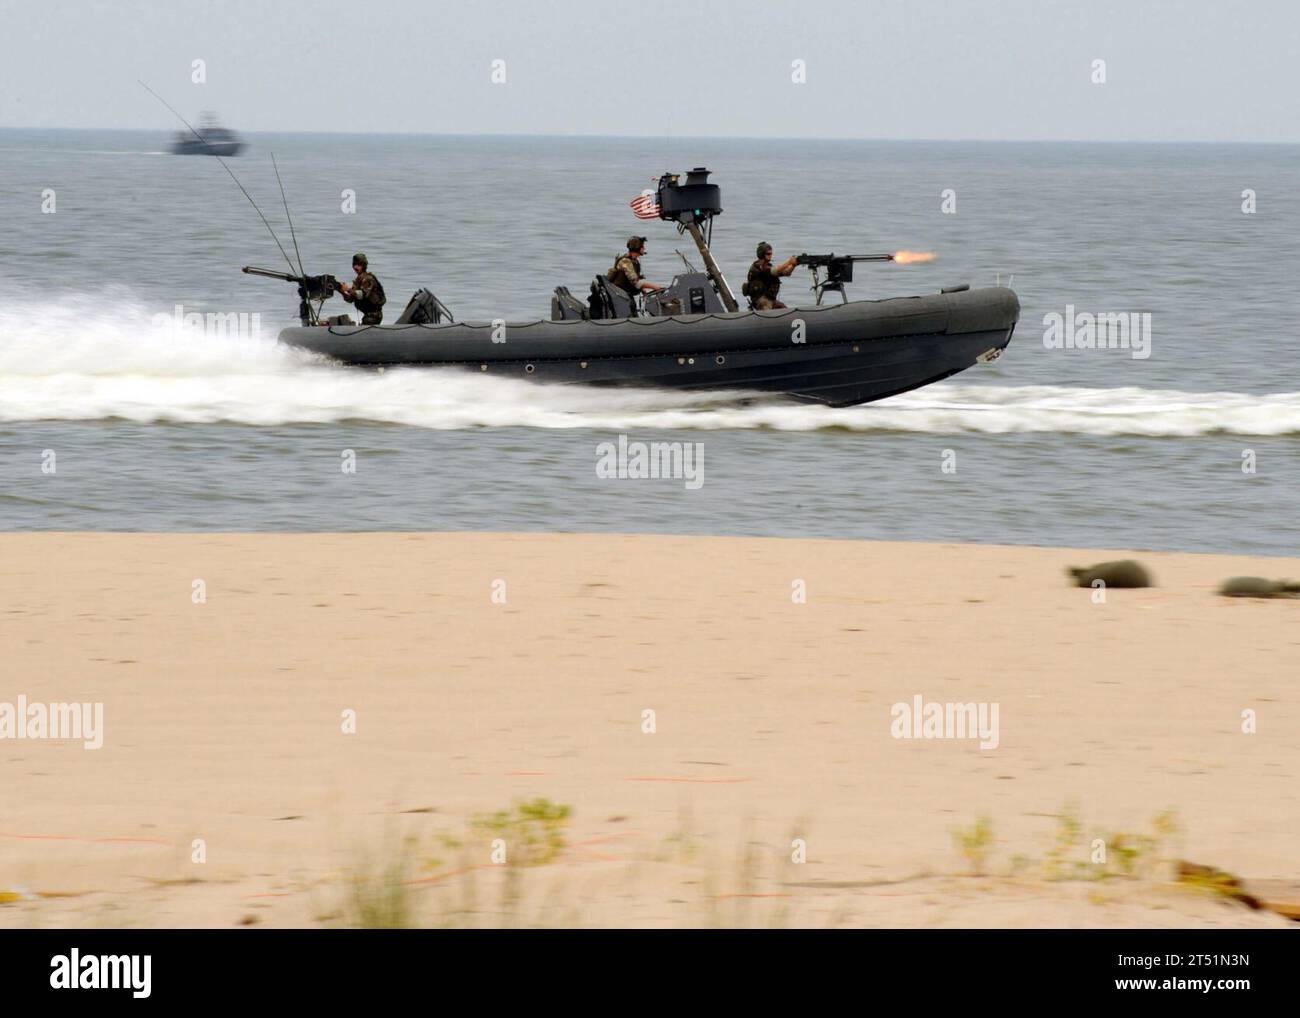 1007178949D-327 VIRGINIA BEACH, Va. (July 17, 2010) Special Warfare Combatant-craft Crewmen assigned to Special Boat Team (SBT) 20 perform a capability demonstration at Joint Expeditionary Base Little Creek-Fort Story. The Naval Special Warfare community displayed its capabilities as part of the 41st UDT-SEAL East Coast Reunion celebration. Events are planned throughout the weekend to honor UDT/SEAL history, heritage, and families. Navy Stock Photo